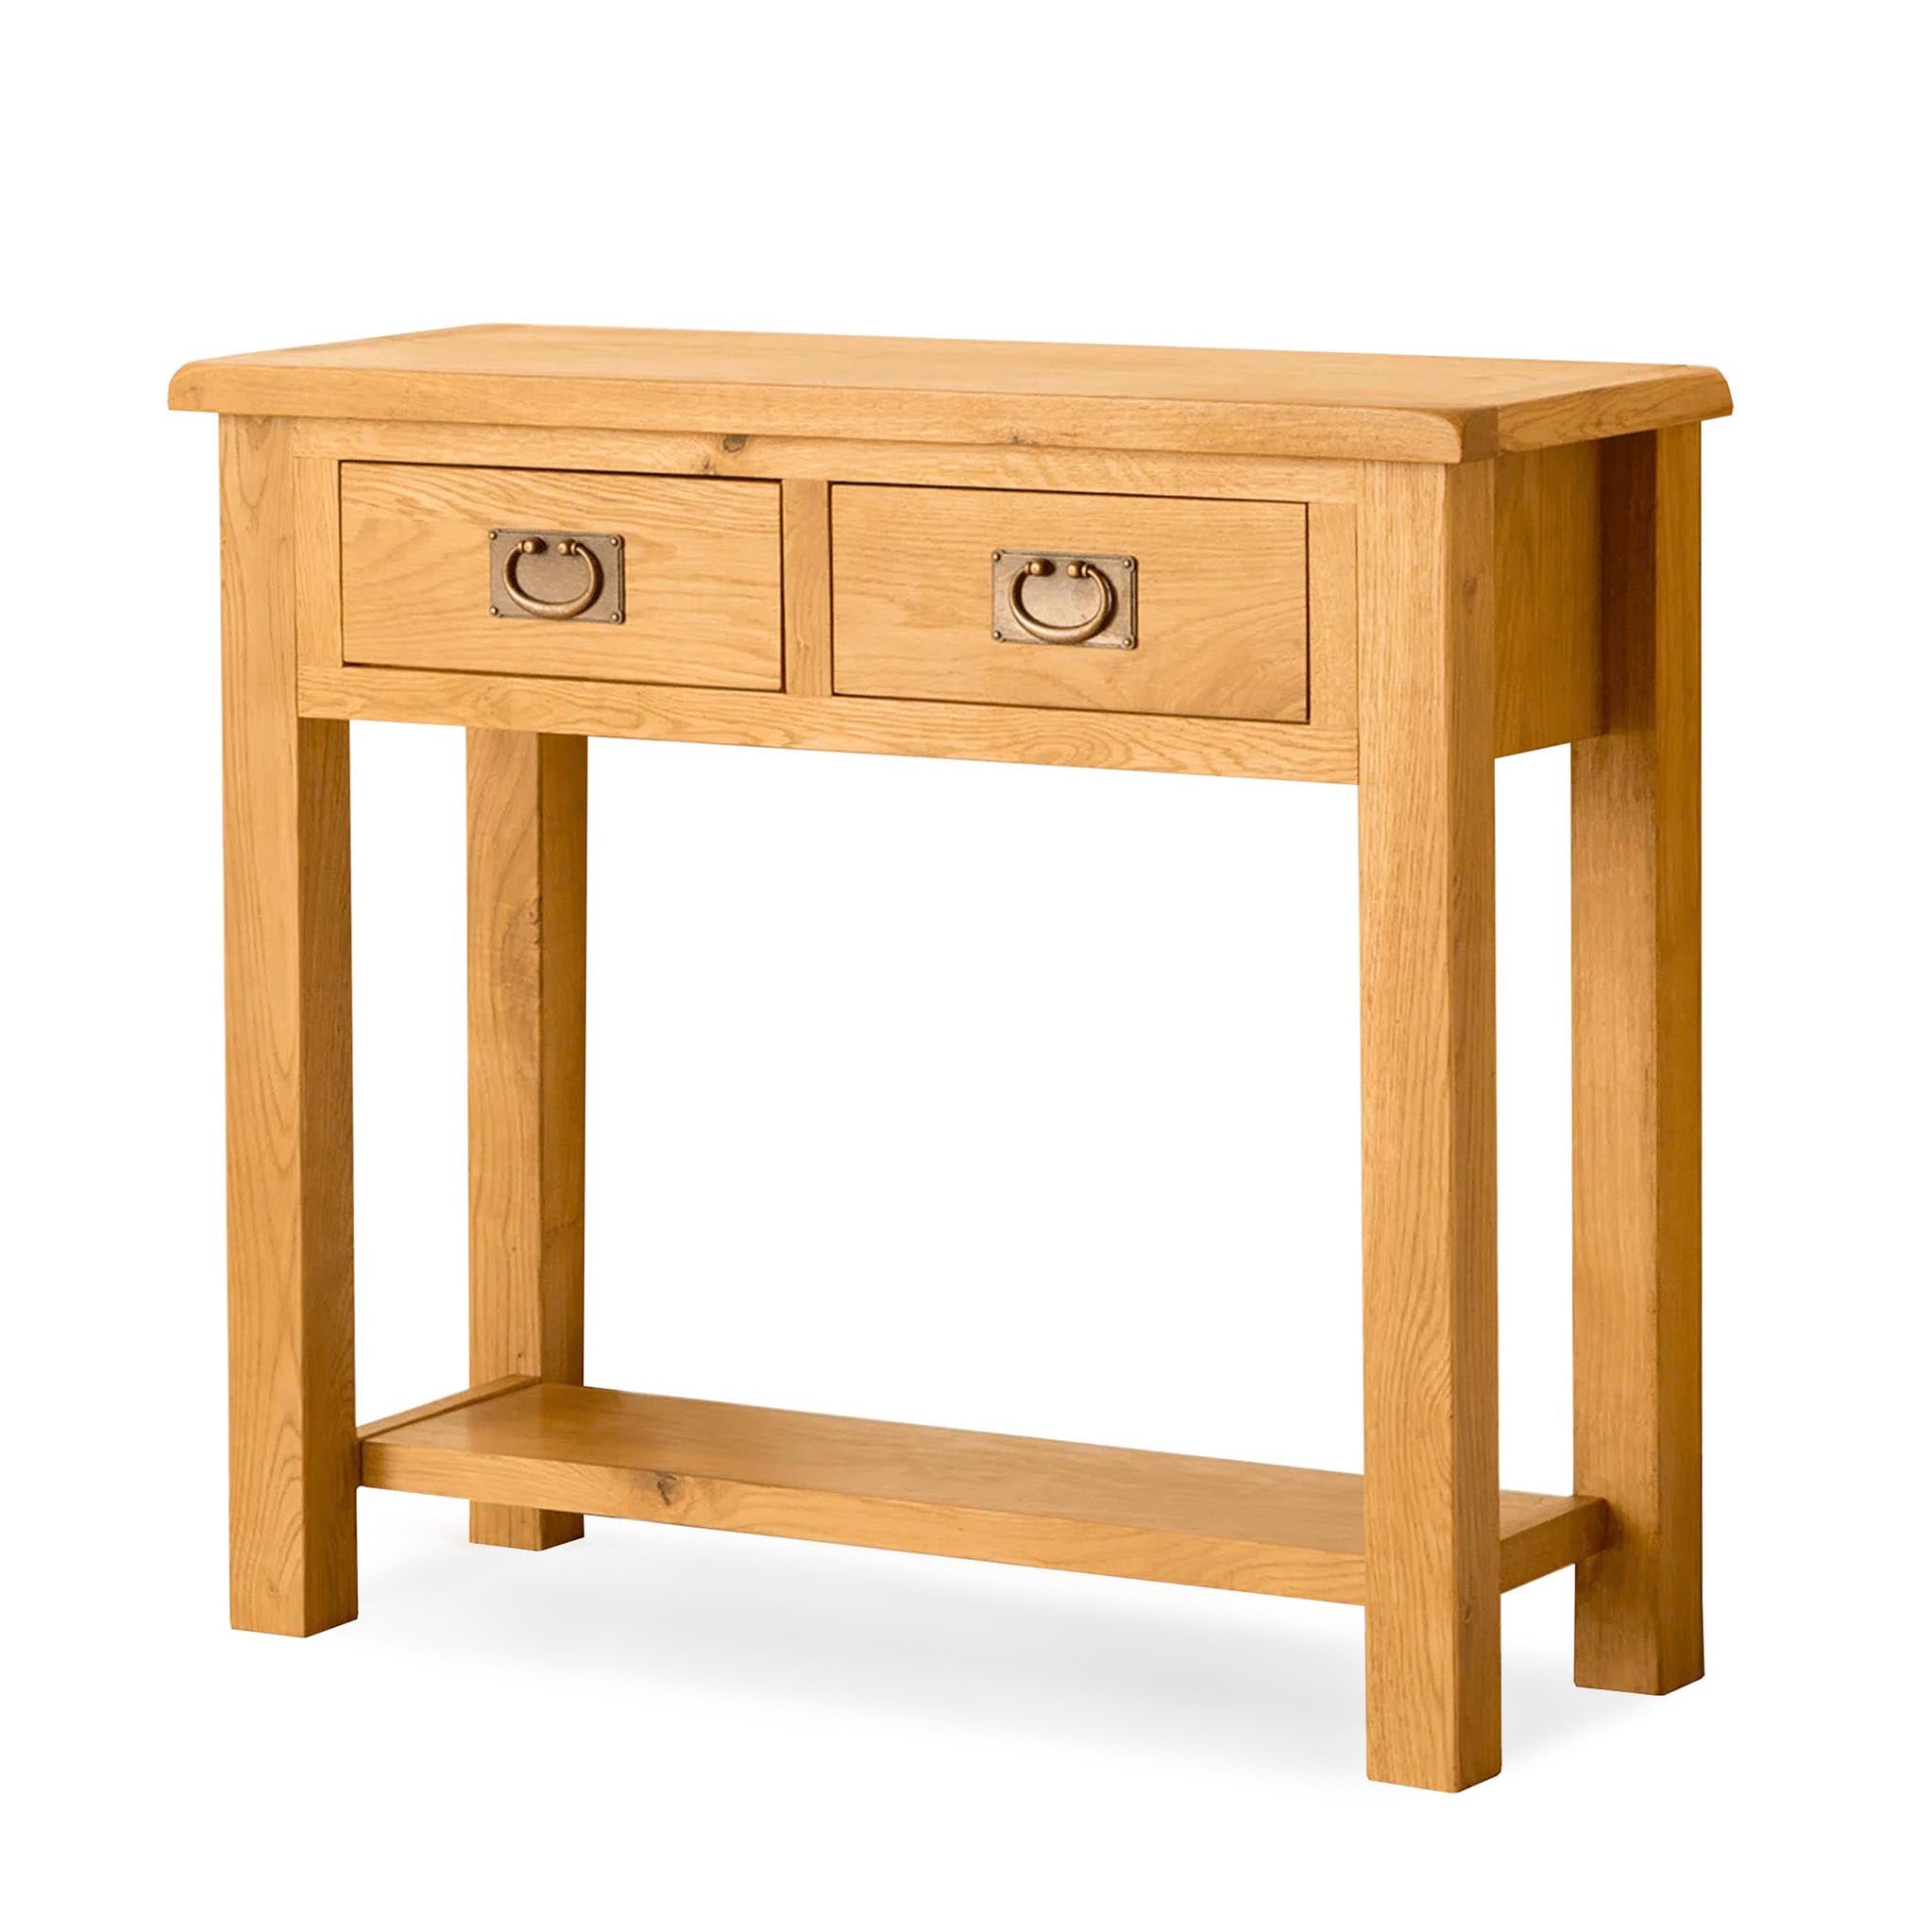 Lanner Oak Console Table With Drawers Metal Handles Roseland